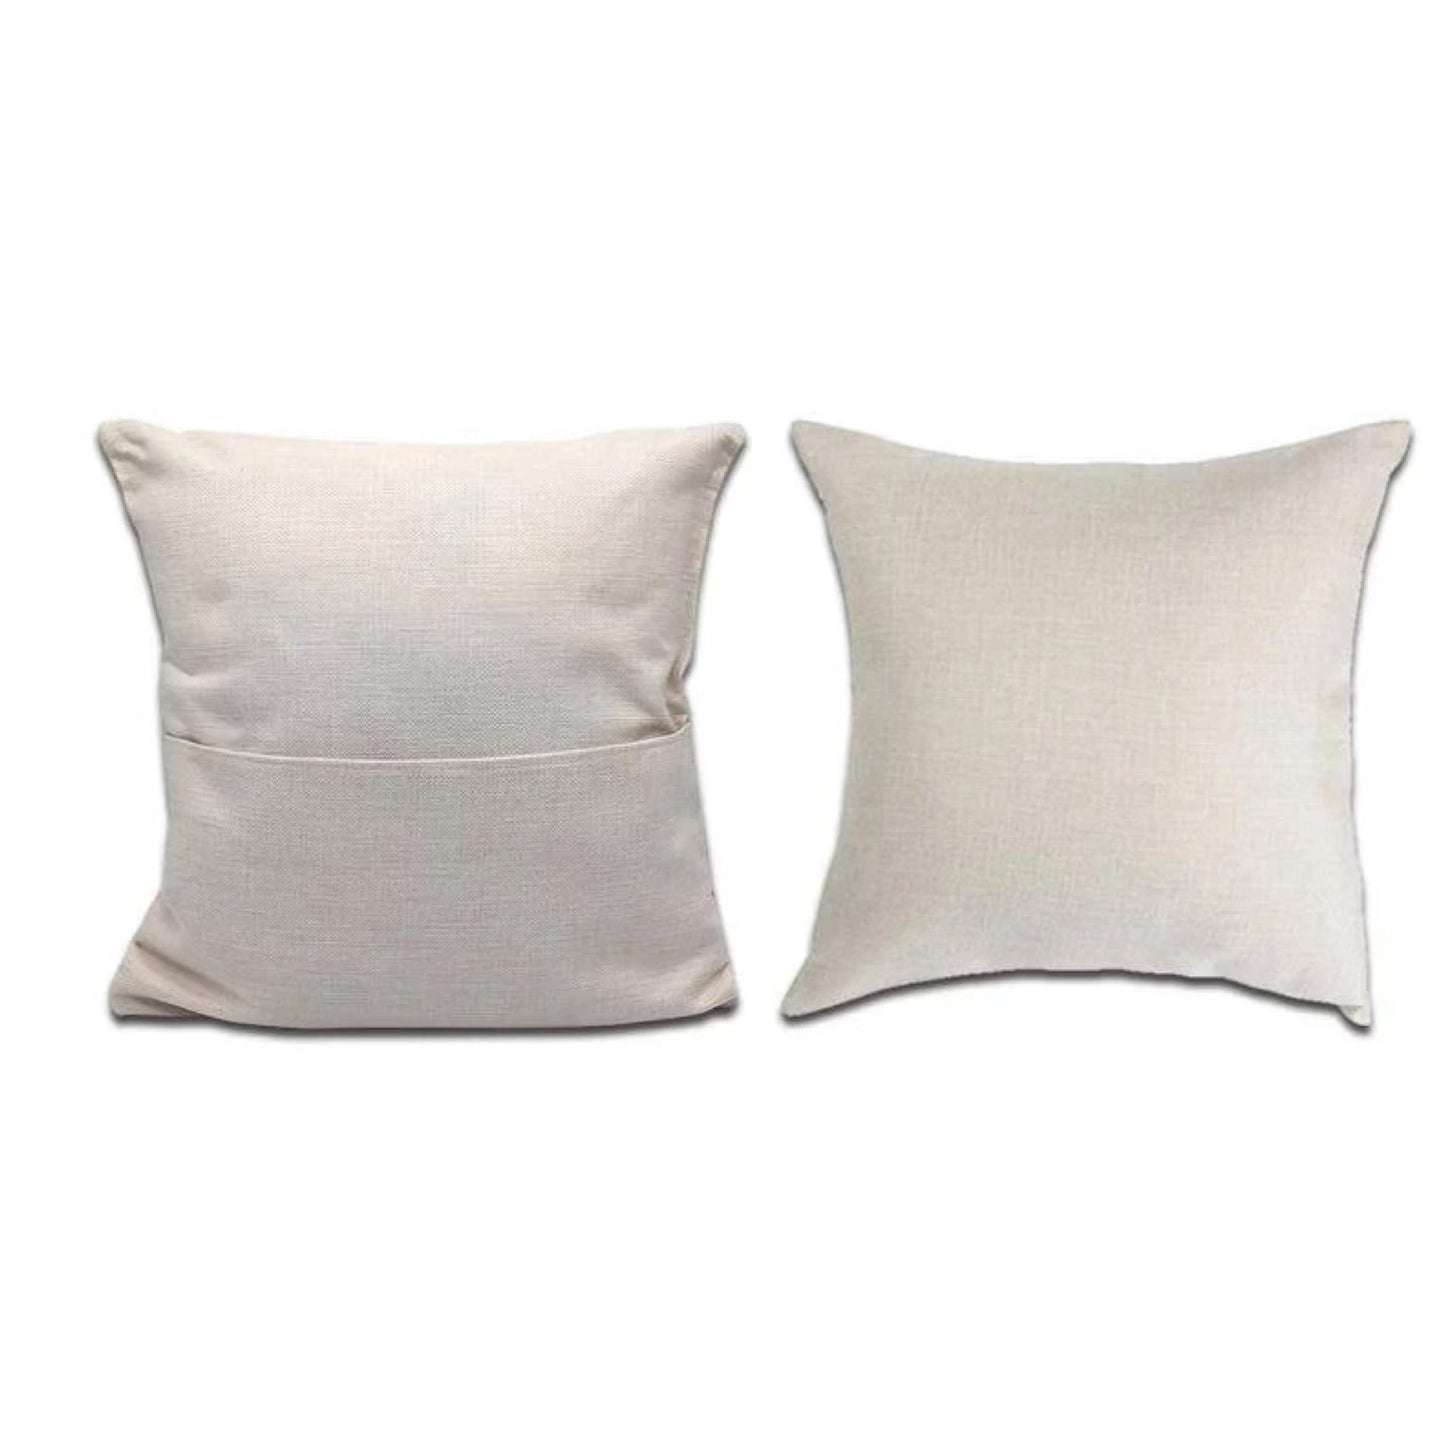 Pocket Pillow Case Covers - Carolina Blanks  And More LLC